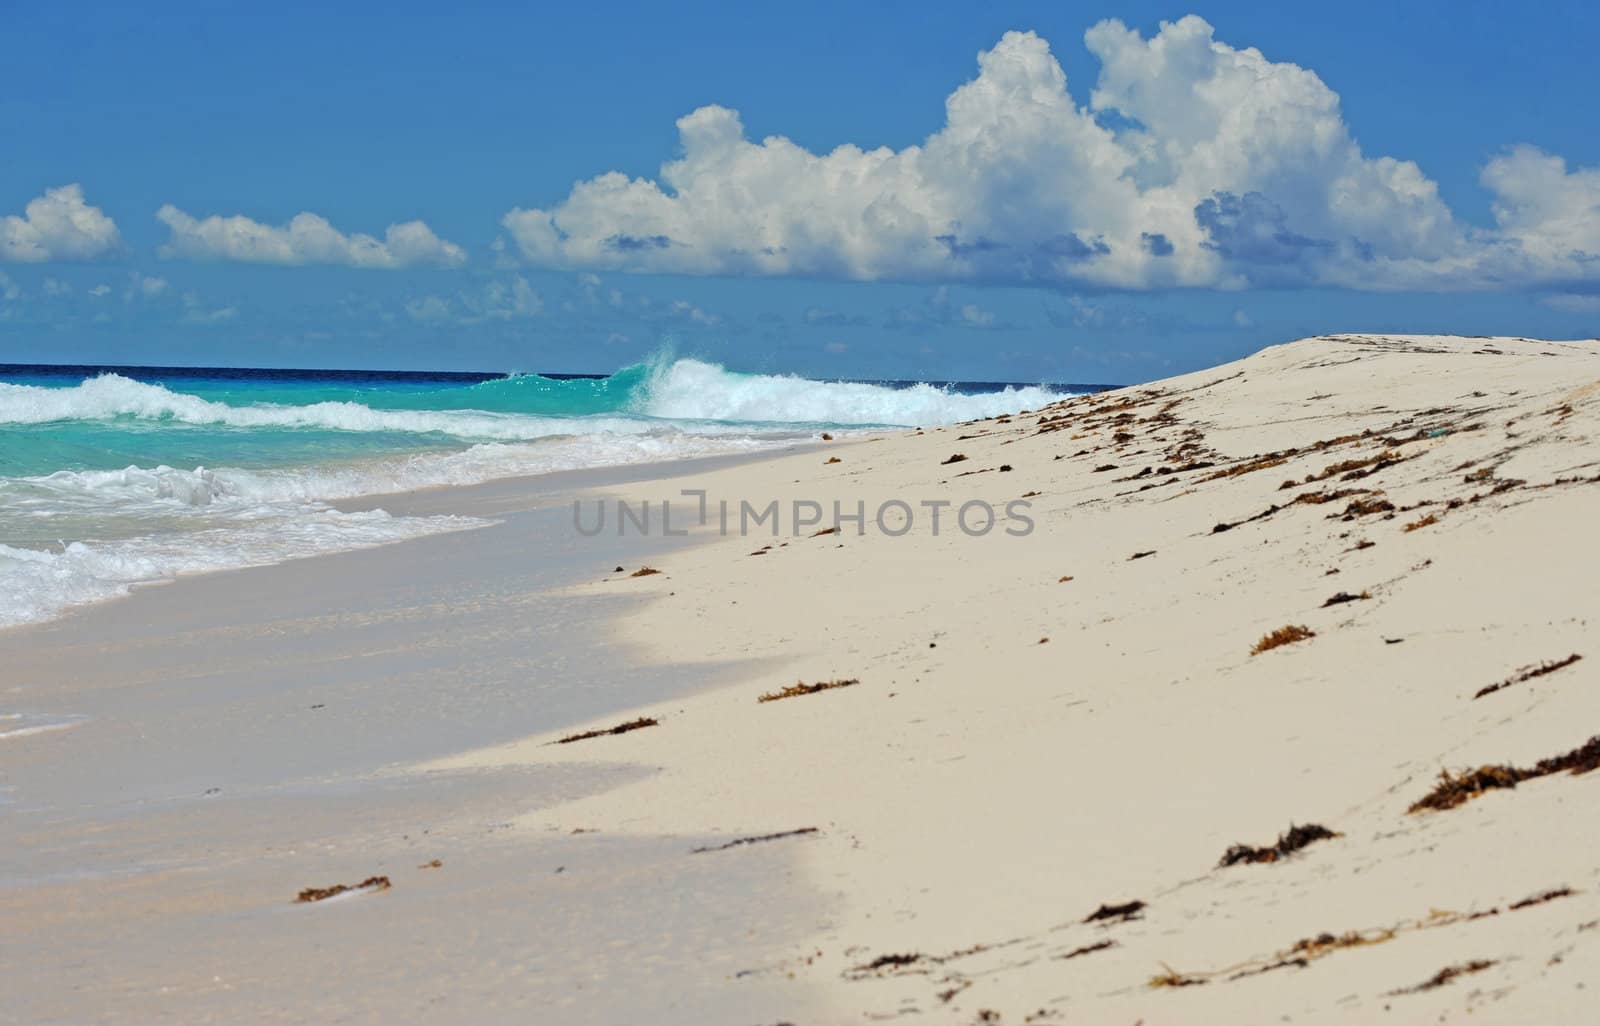 A beach with nobody on it with crystal blue water and untouched white sand